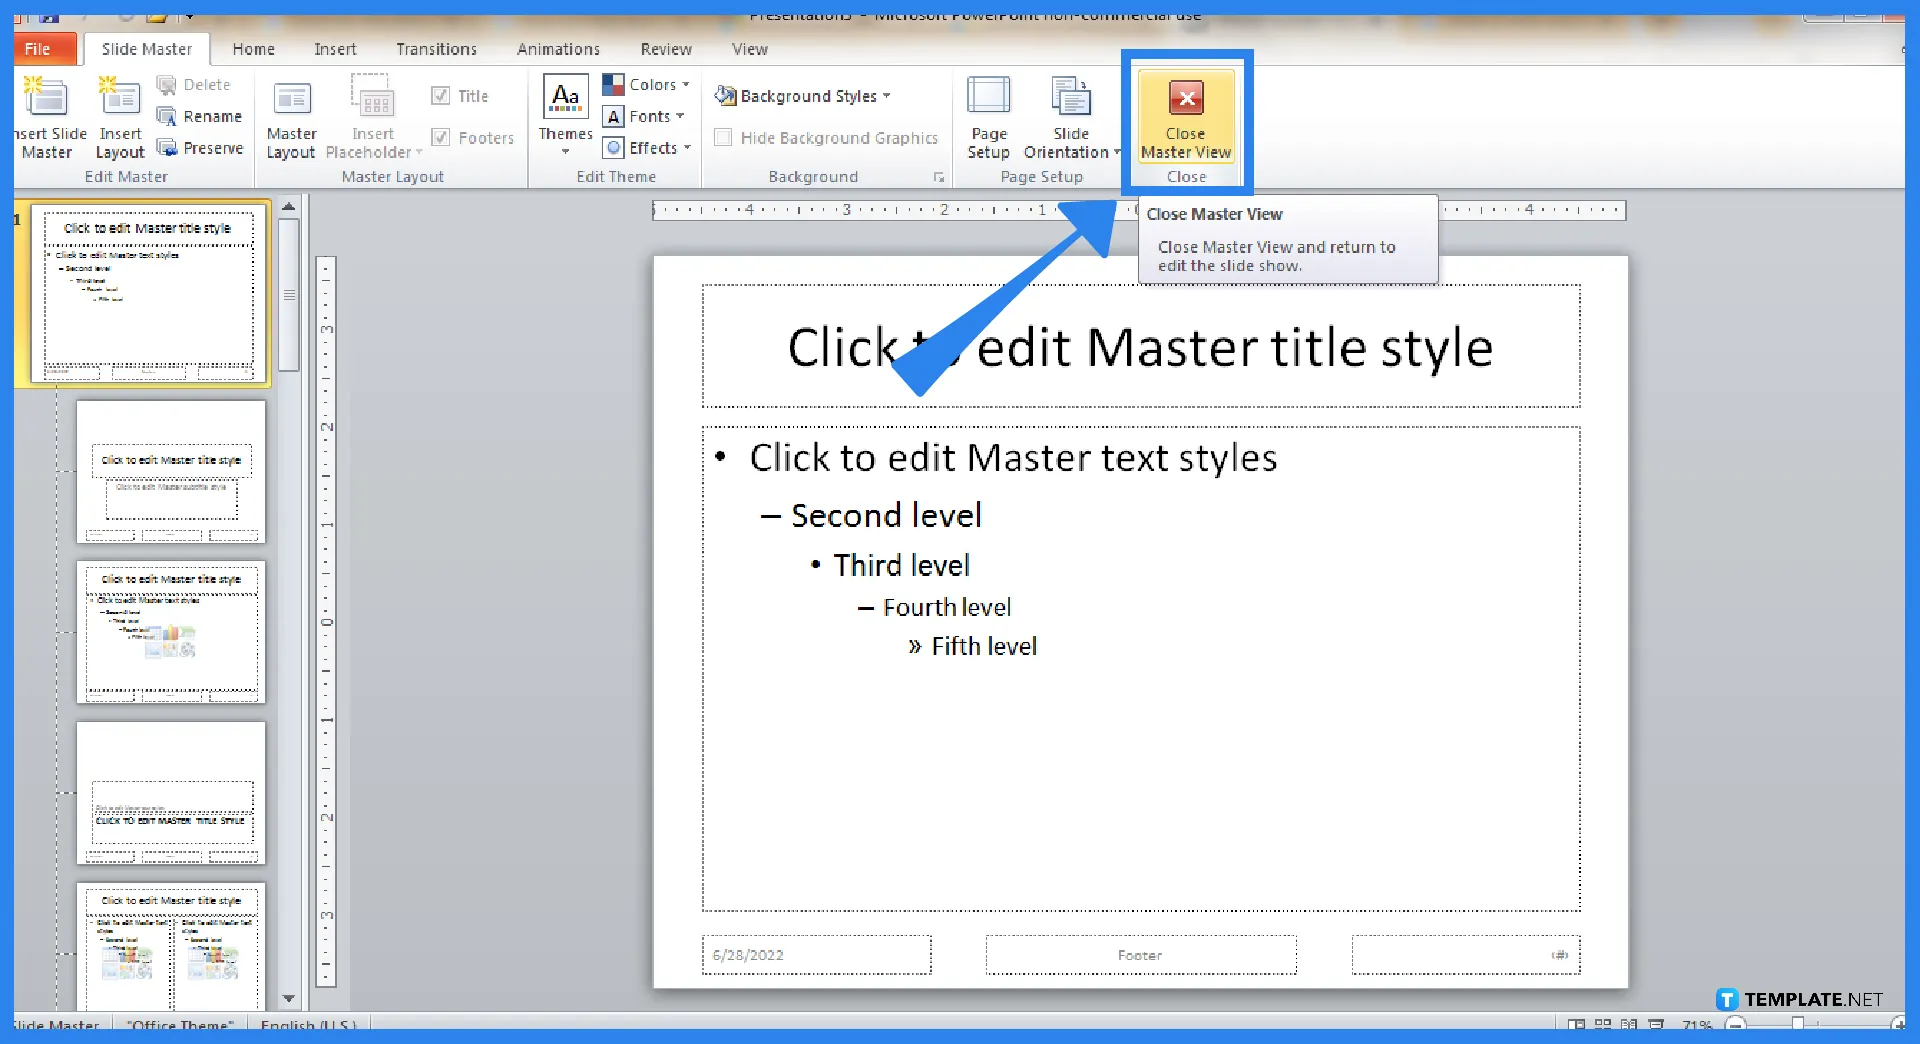 how-do-you-access-slide-master-view-in-microsoft-powerpoint-steps-5